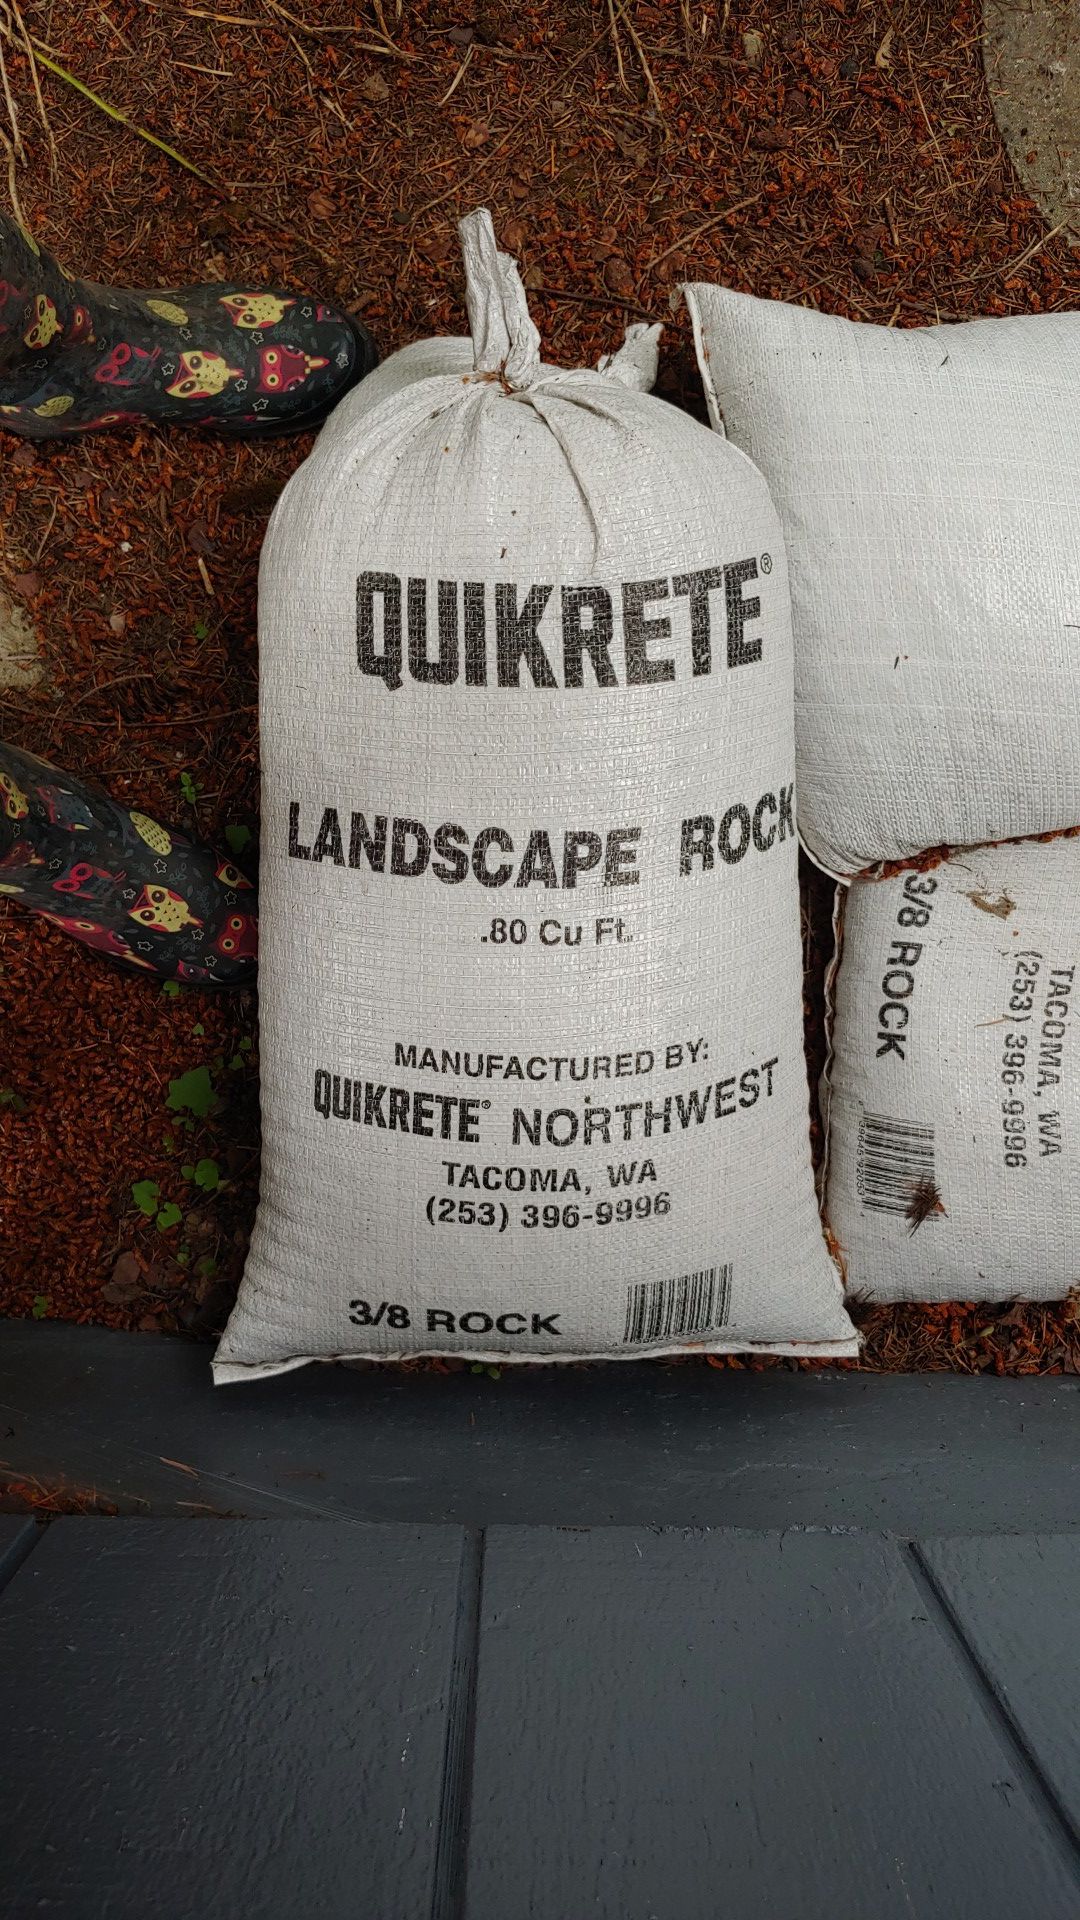 $25 for all 5 bags of Quikrete 3/8 landscape rock .80 cubic ft a bag.